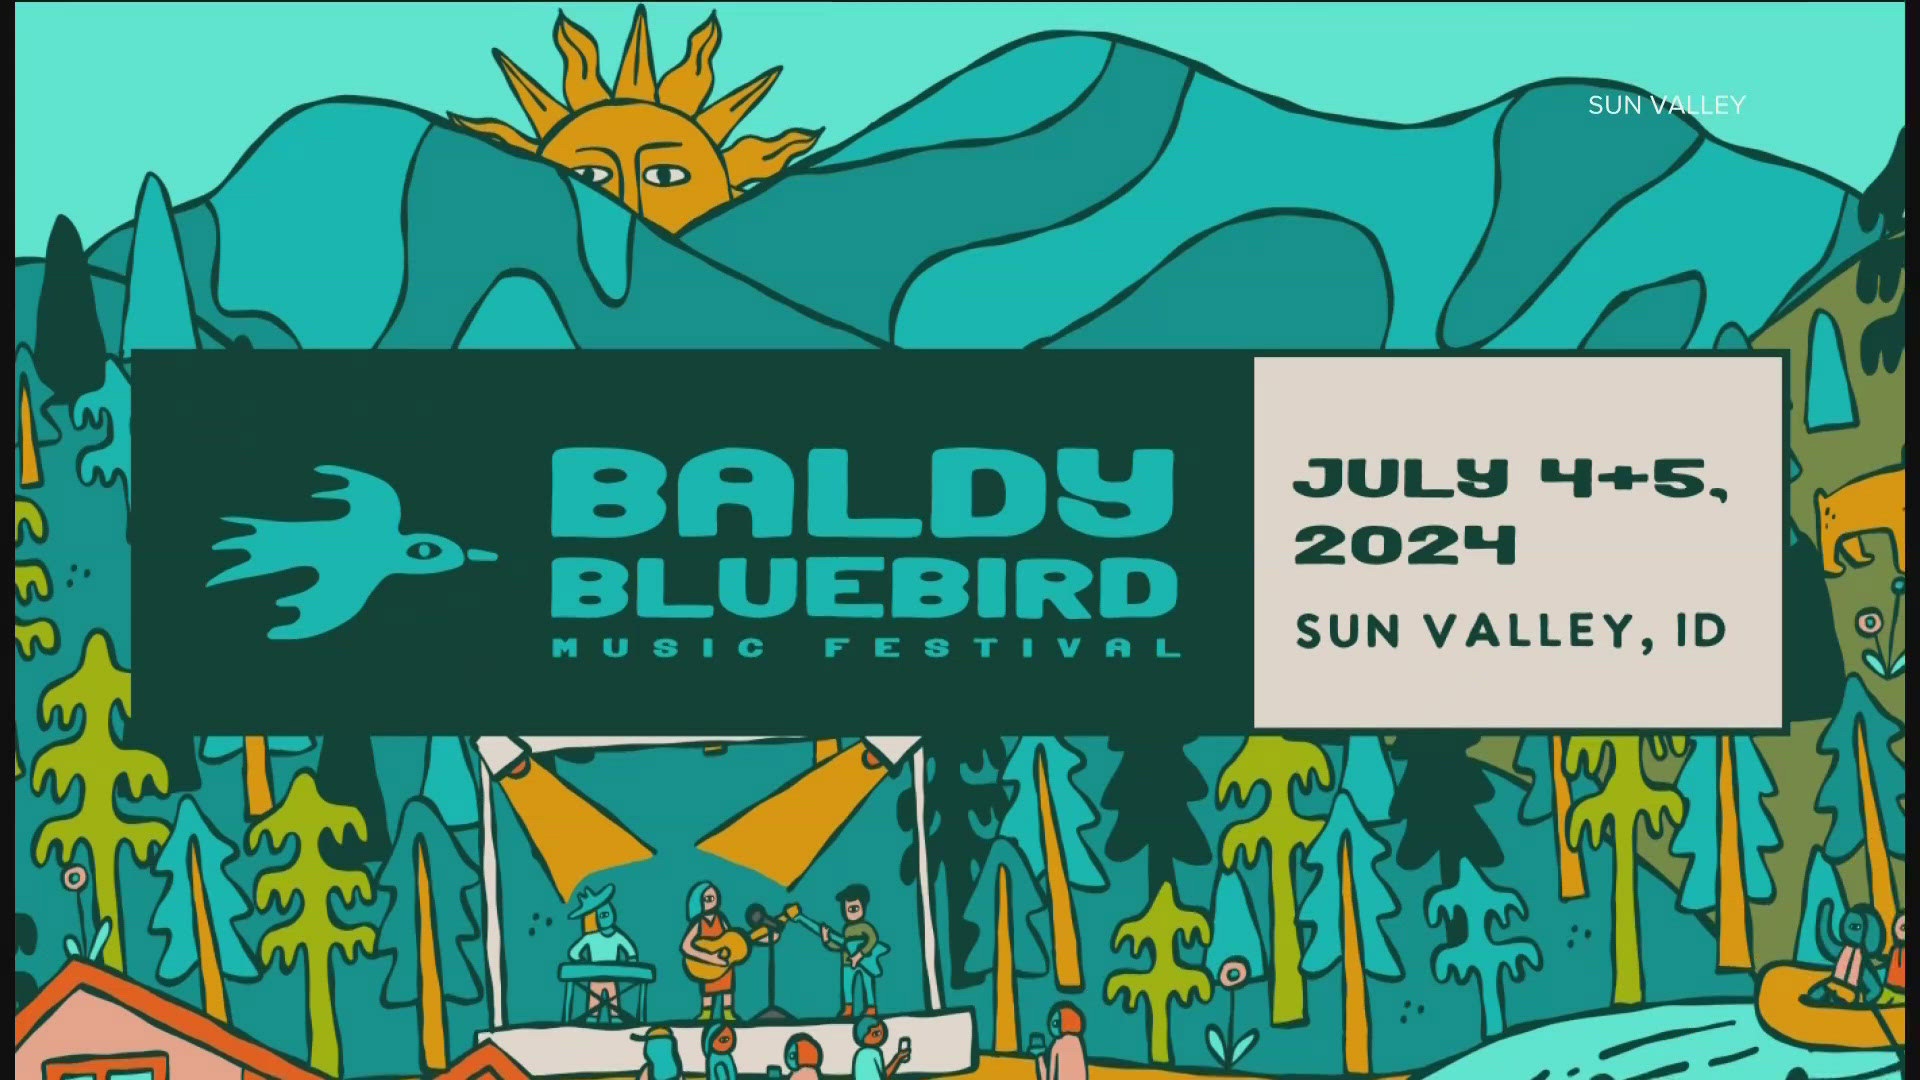 It kicked off on Thursday, and continues to rock into Friday. It's the resort's first Baldy Bluebird Music Festival.